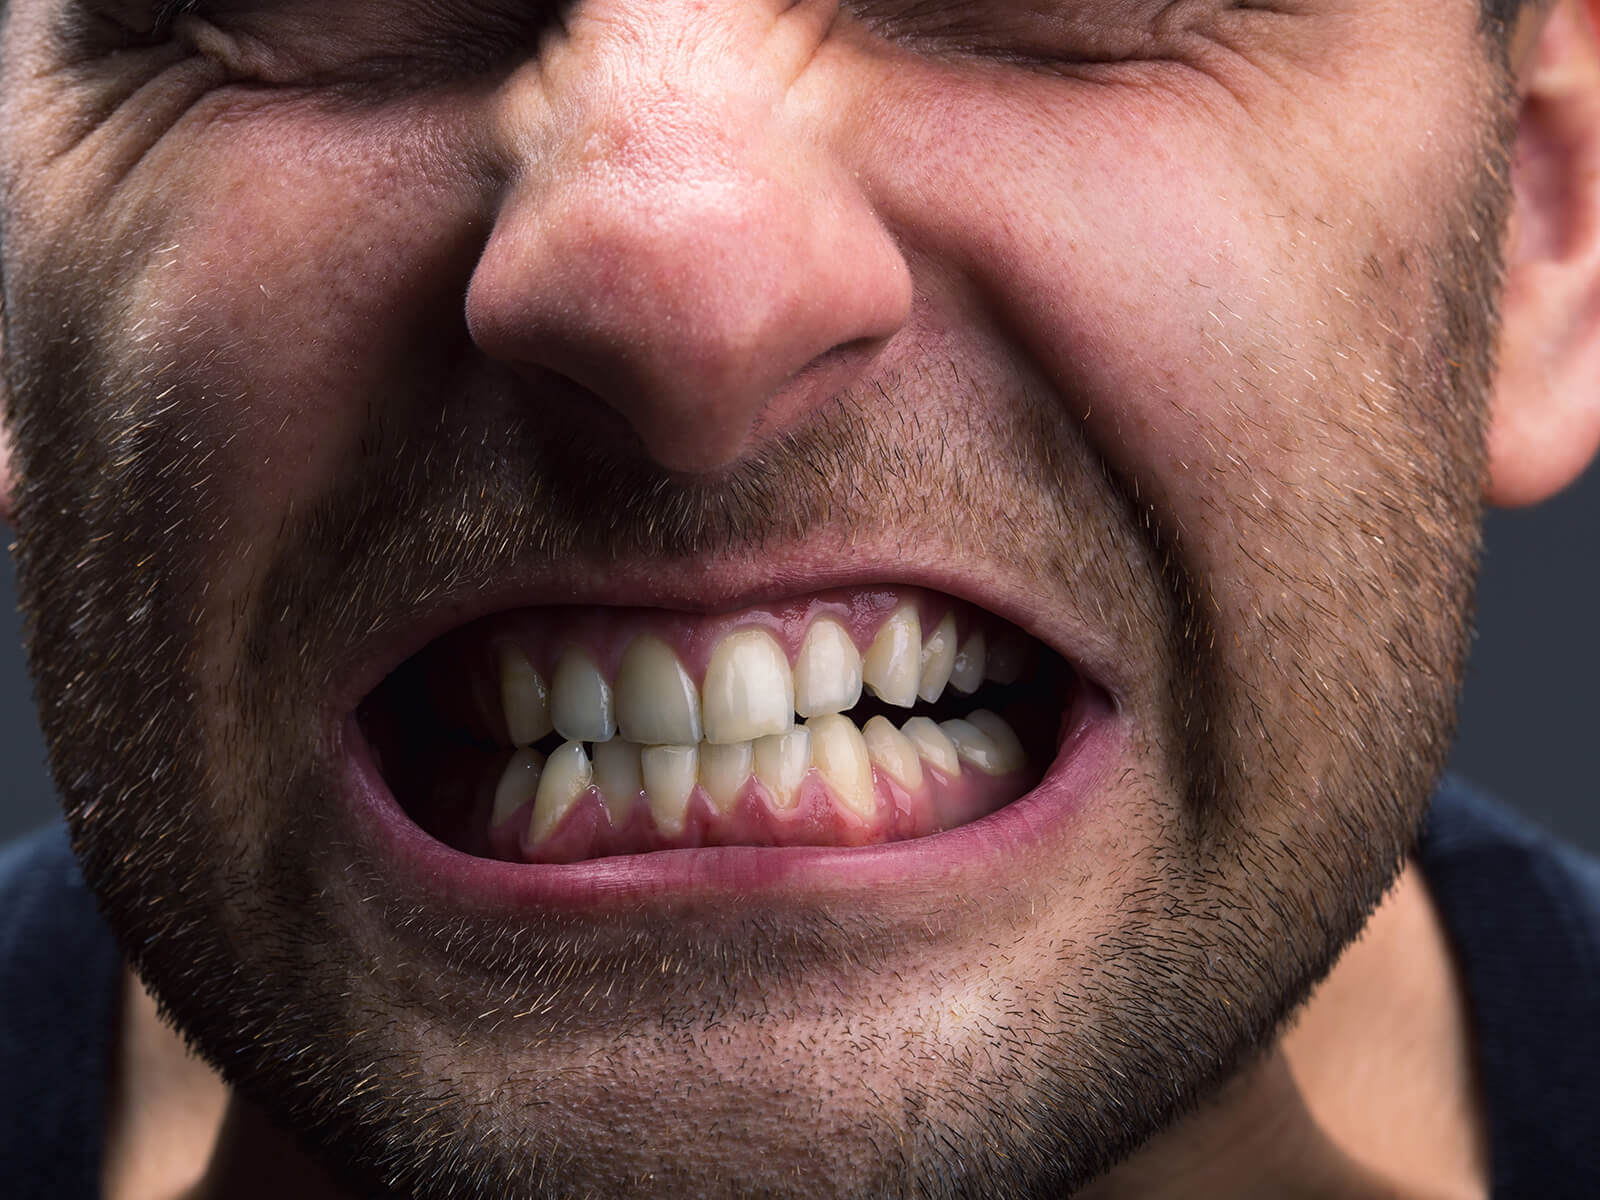 Turn Around The Effects of Teeth Grinding